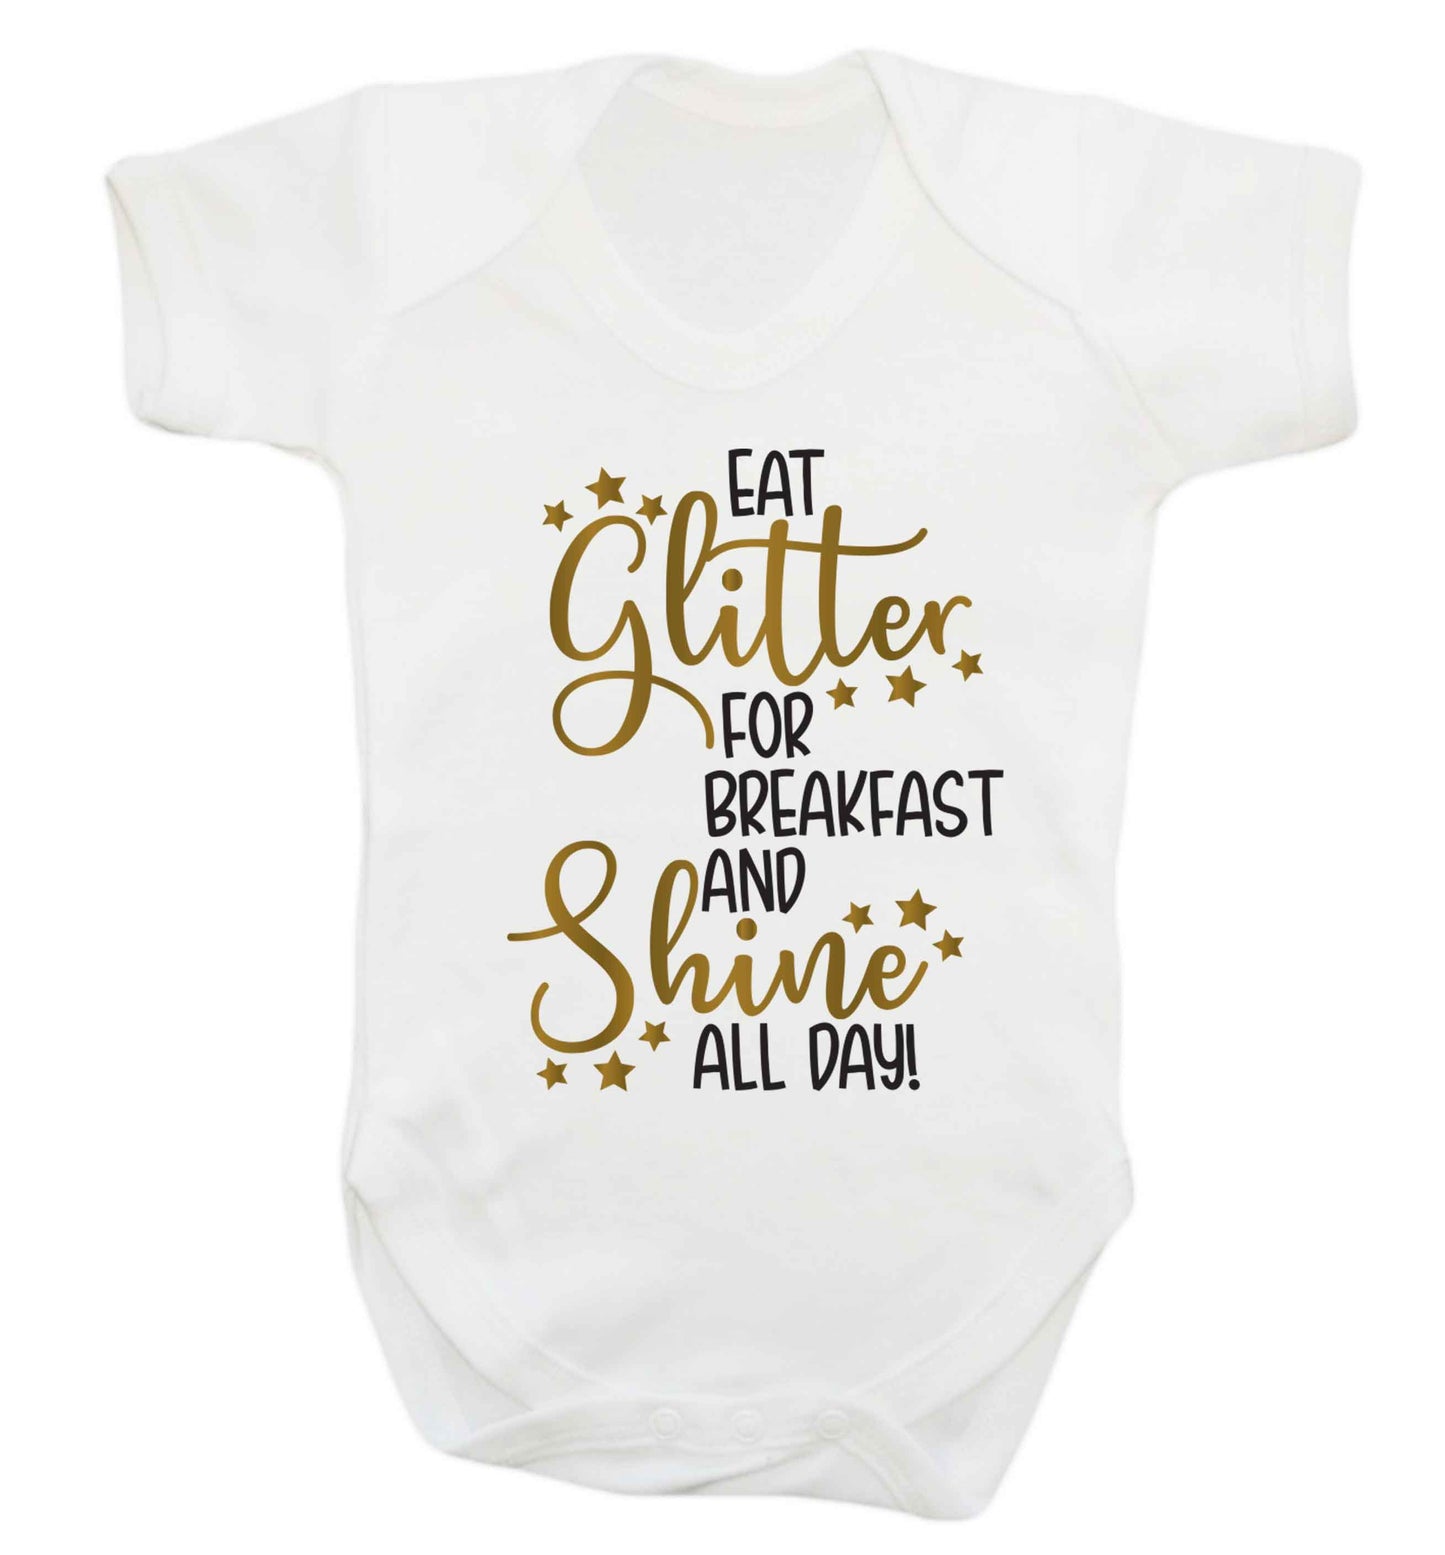 Eat glitter for breakfast and shine all day Baby Vest white 18-24 months